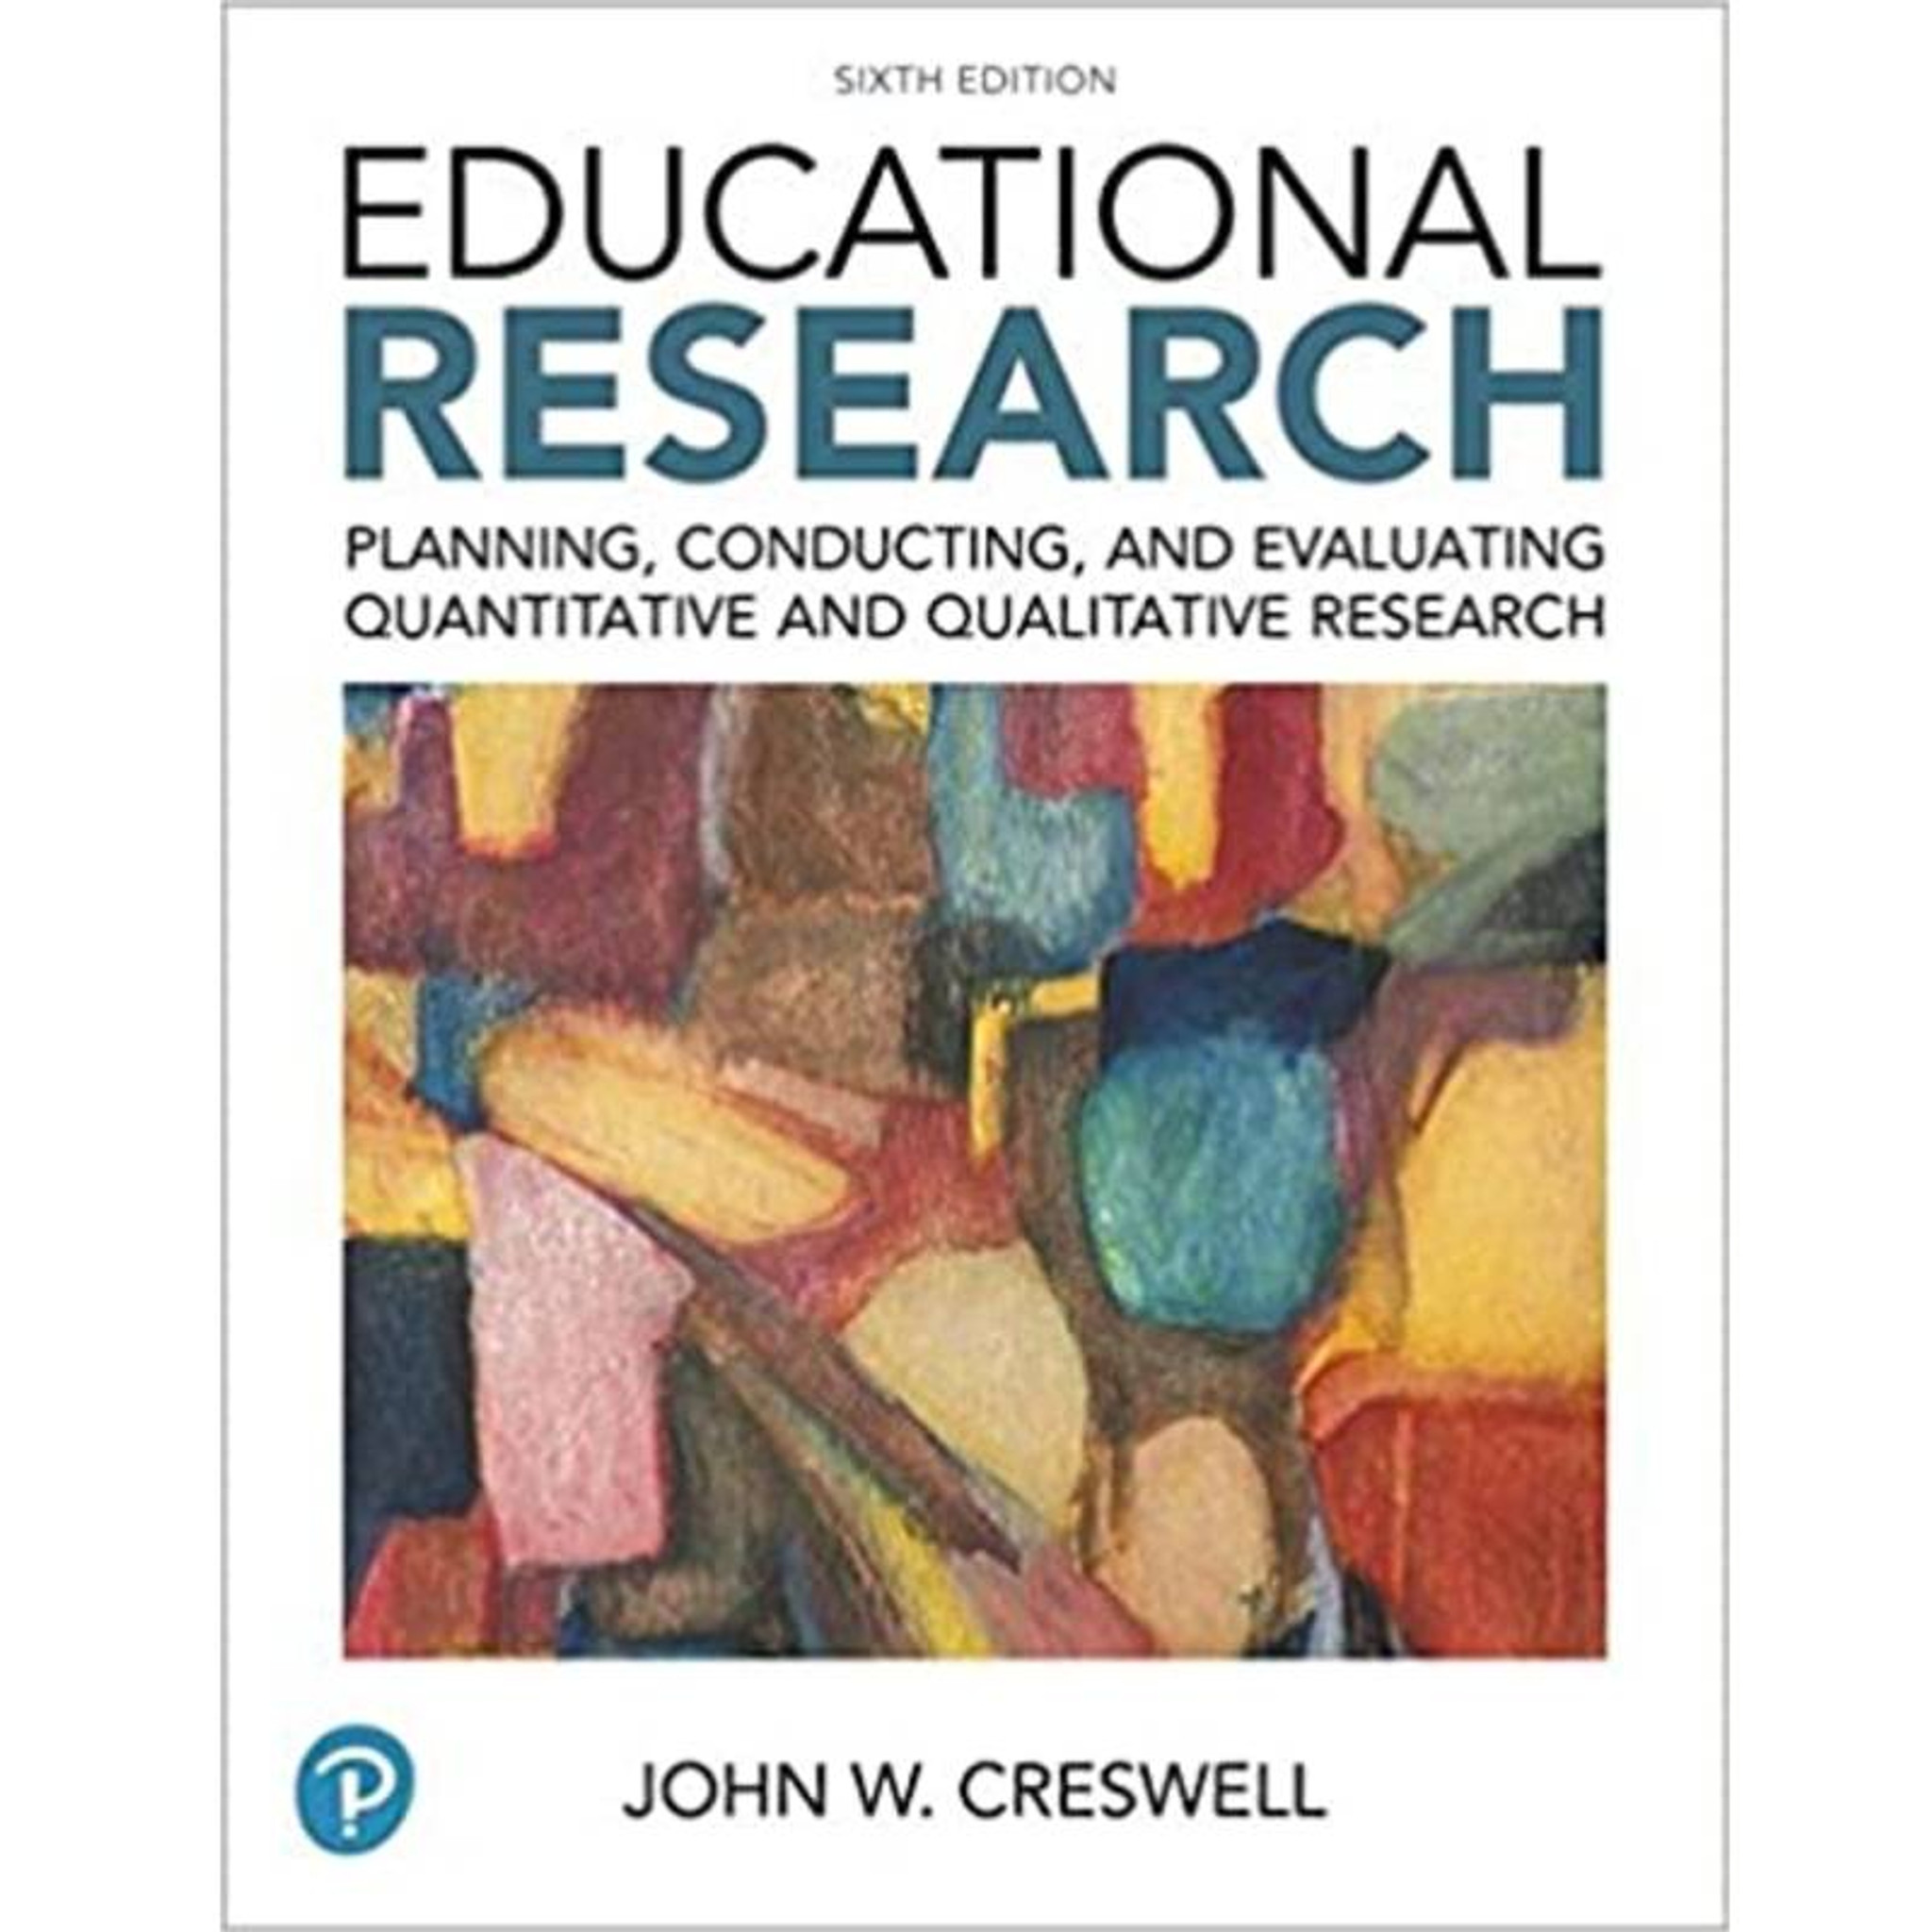 quantitative research definition by creswell